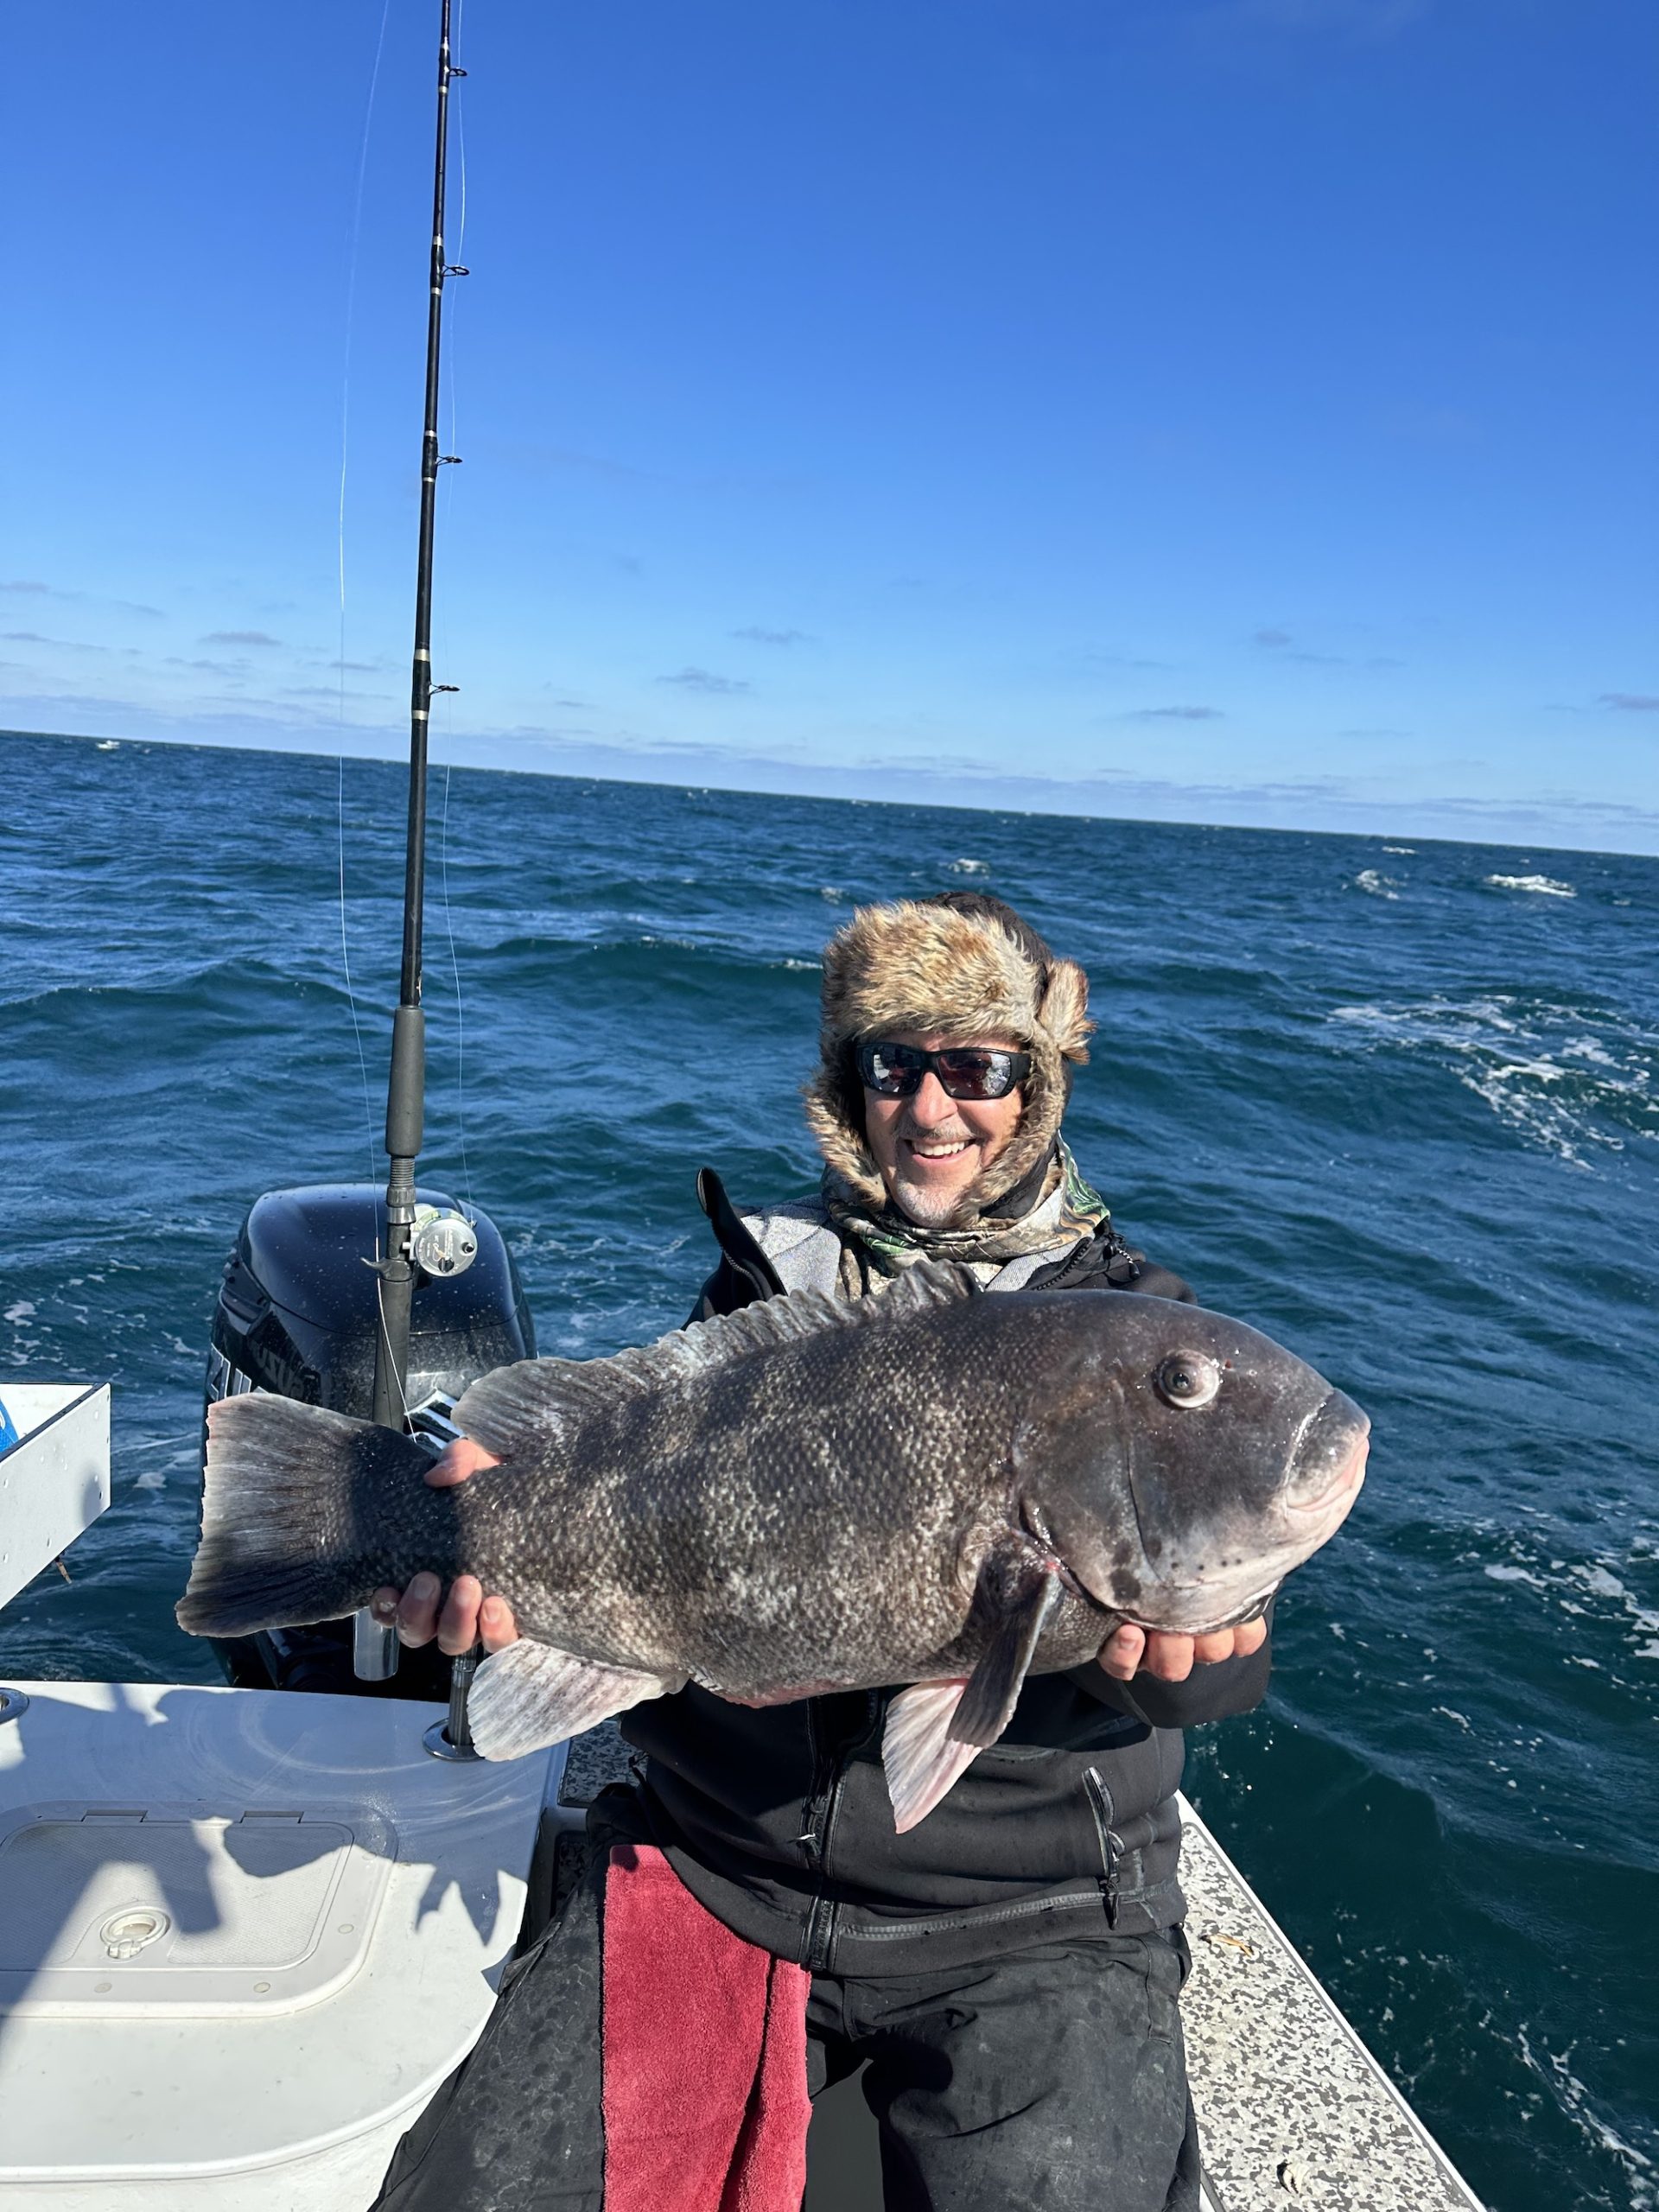 Sporty Seas and 5 Double Digit Tautog